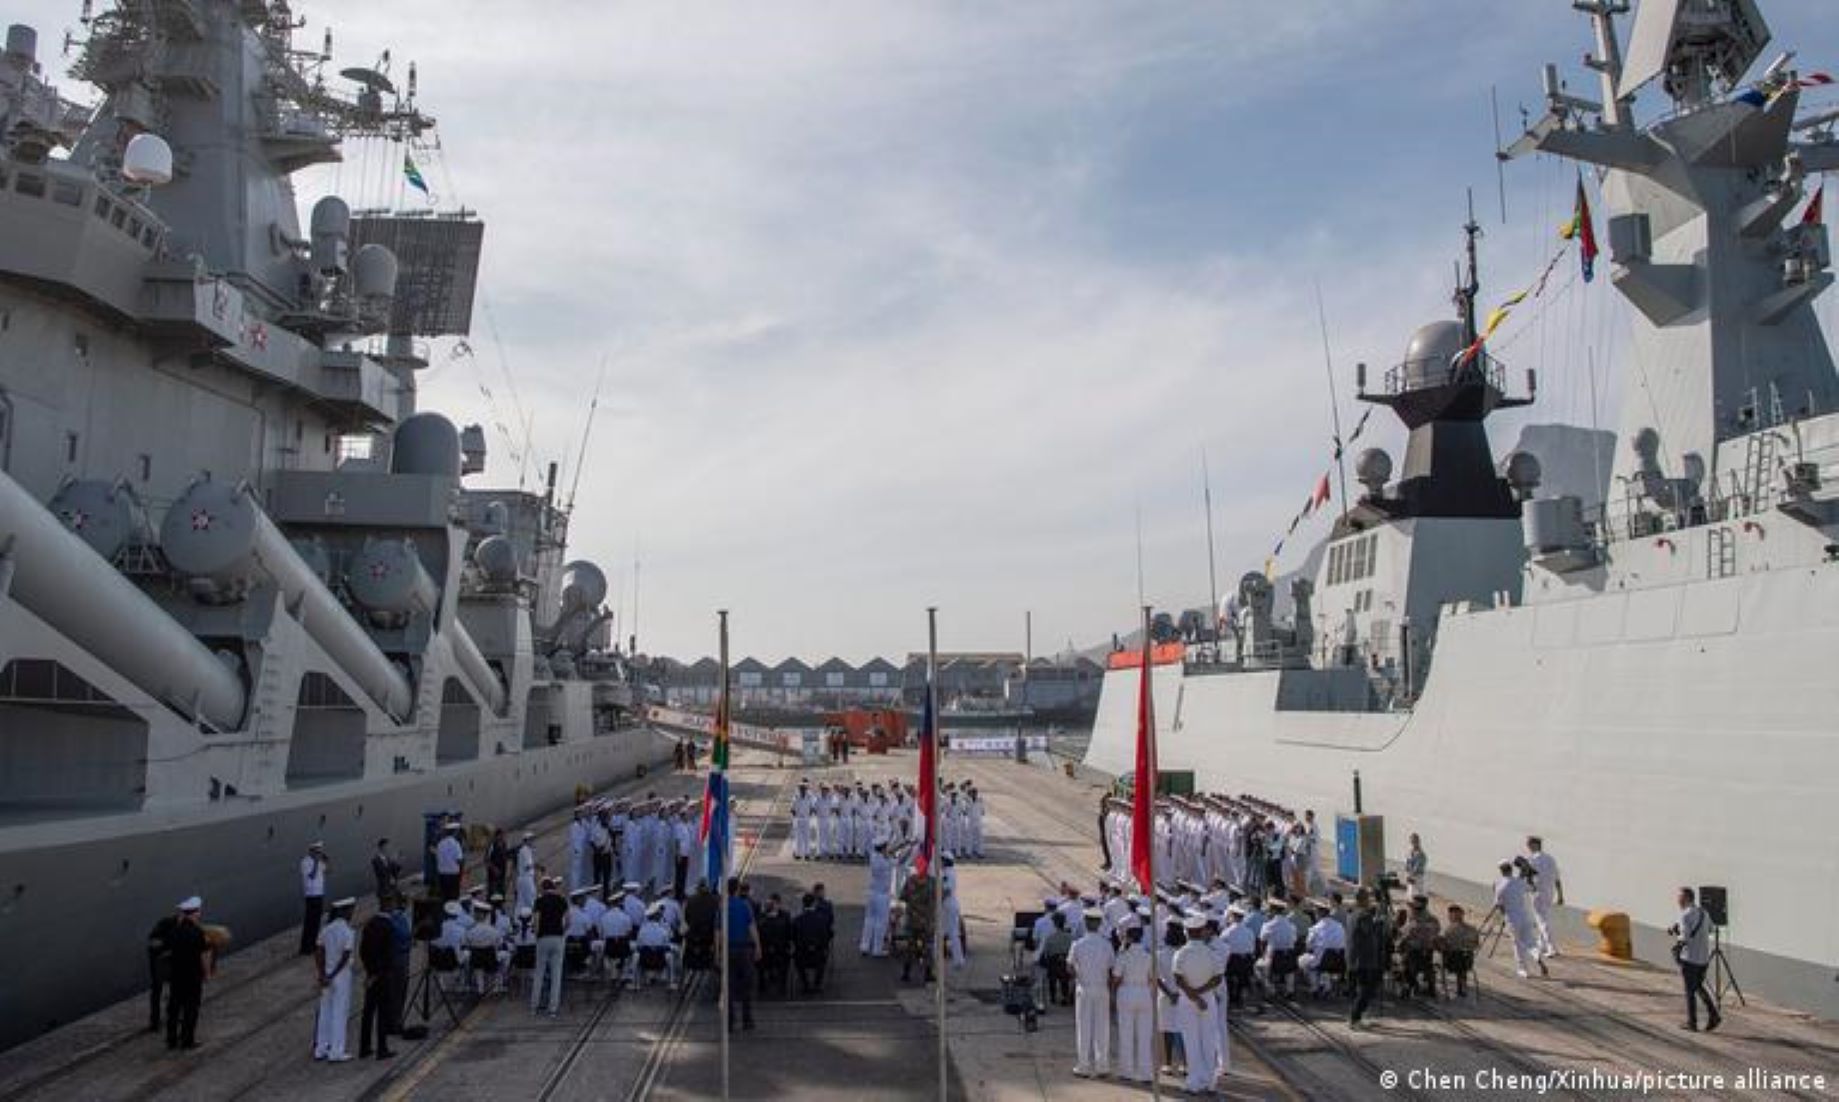 Chinese Naval Fleet Arrived In South African Port Of Richards Bay For Joint Maritime Exercise